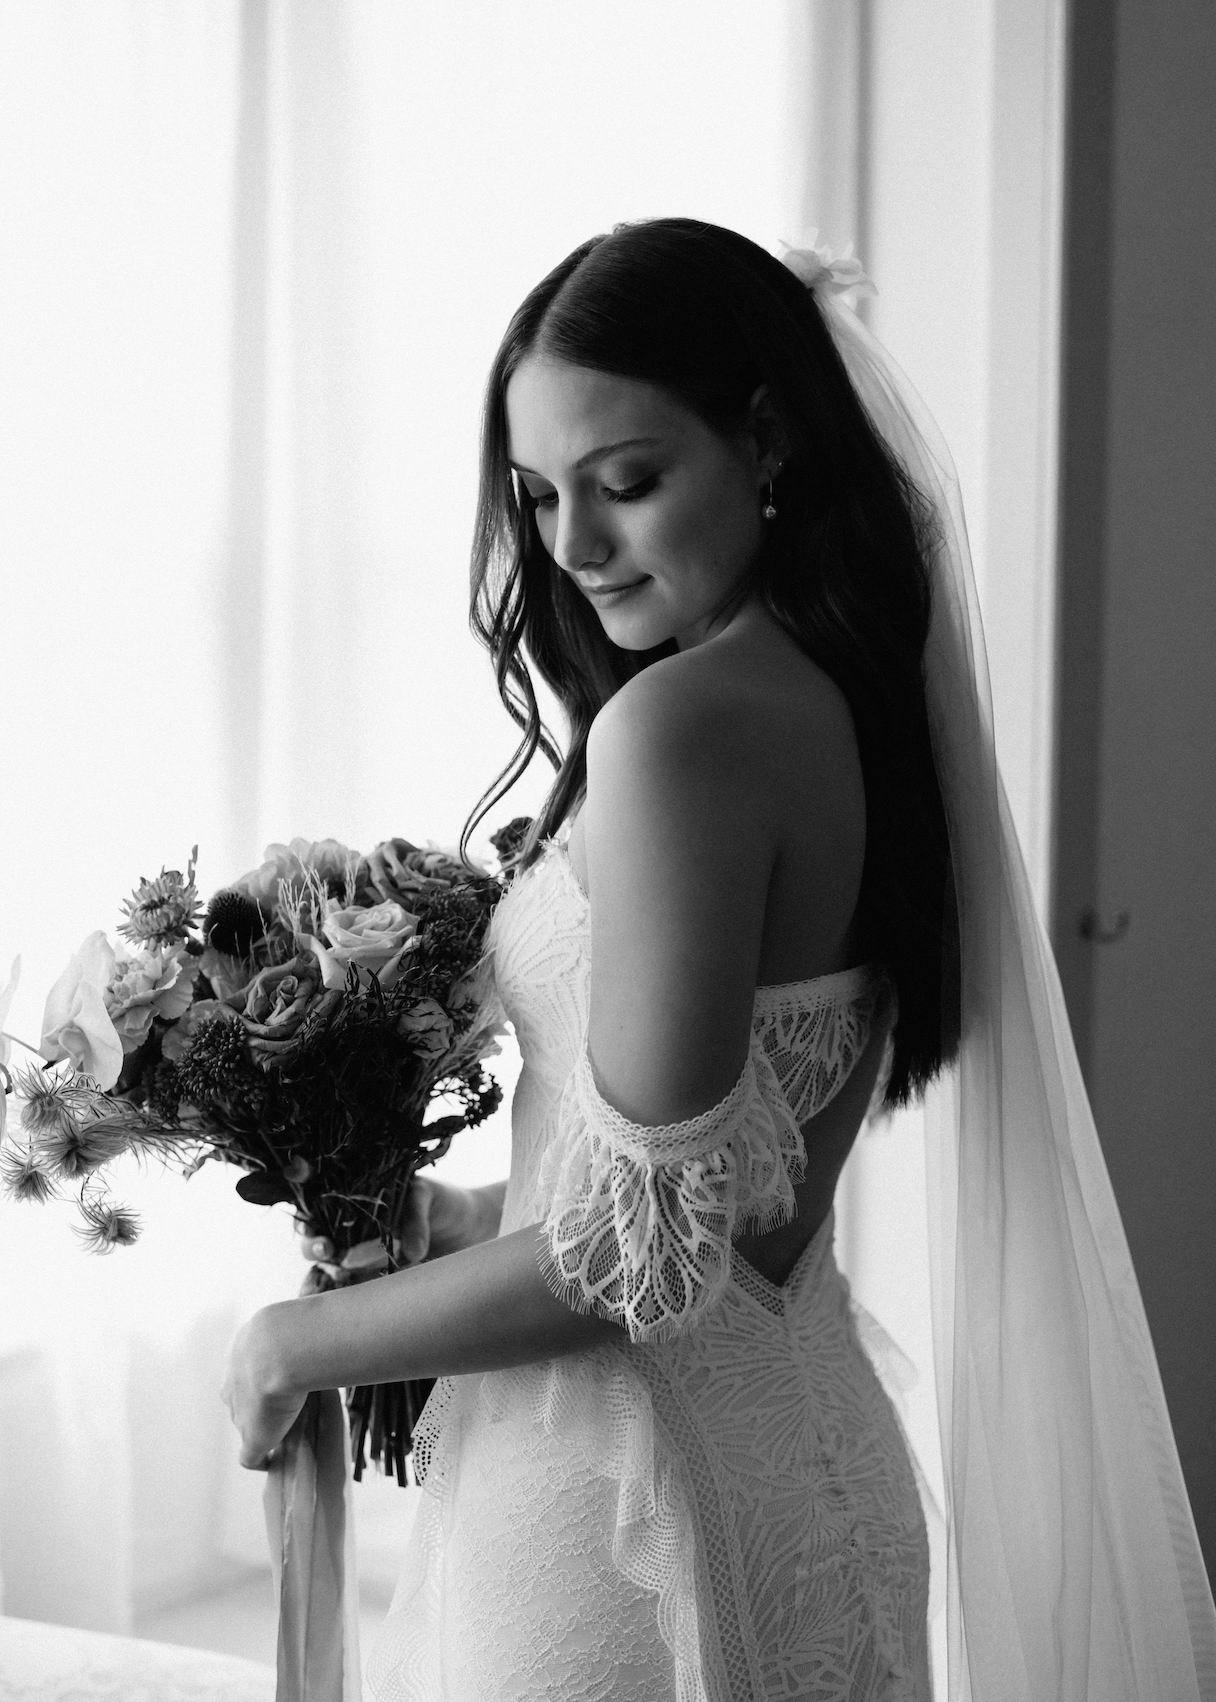 Black and white photo of a bride holding a bouquet of flowers. She is dressed in a lace wedding gown with off-the-shoulder sleeves and a long veil. She is looking down, showcasing the intricate details of her dress and bouquet in front of a softly lit window.